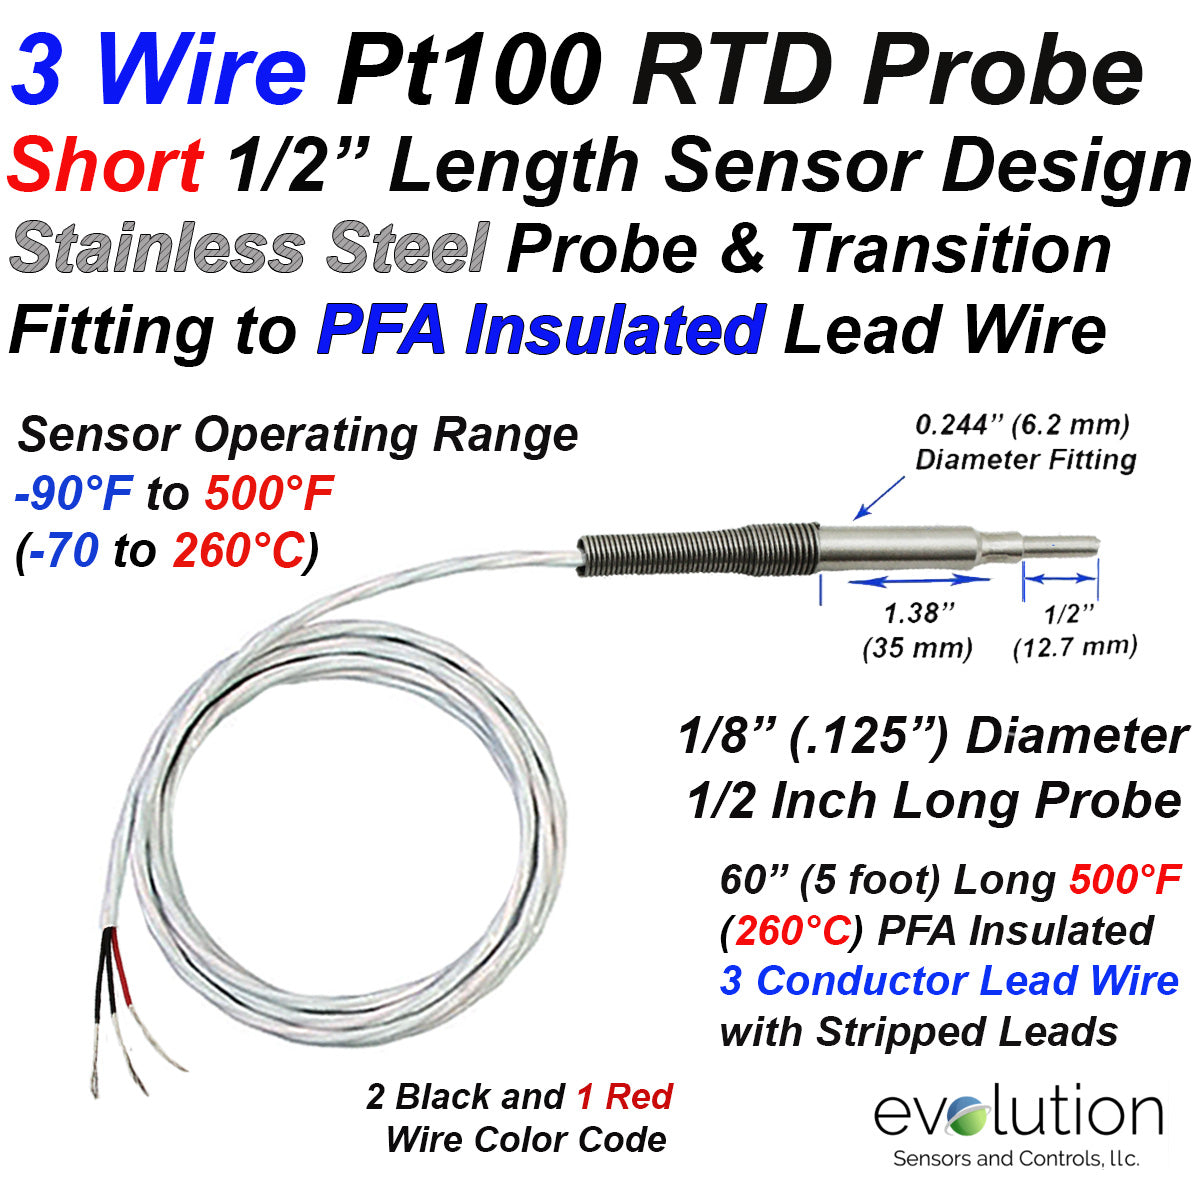 Air Temperature Sensor with sheathed RTD probe for Indoor and